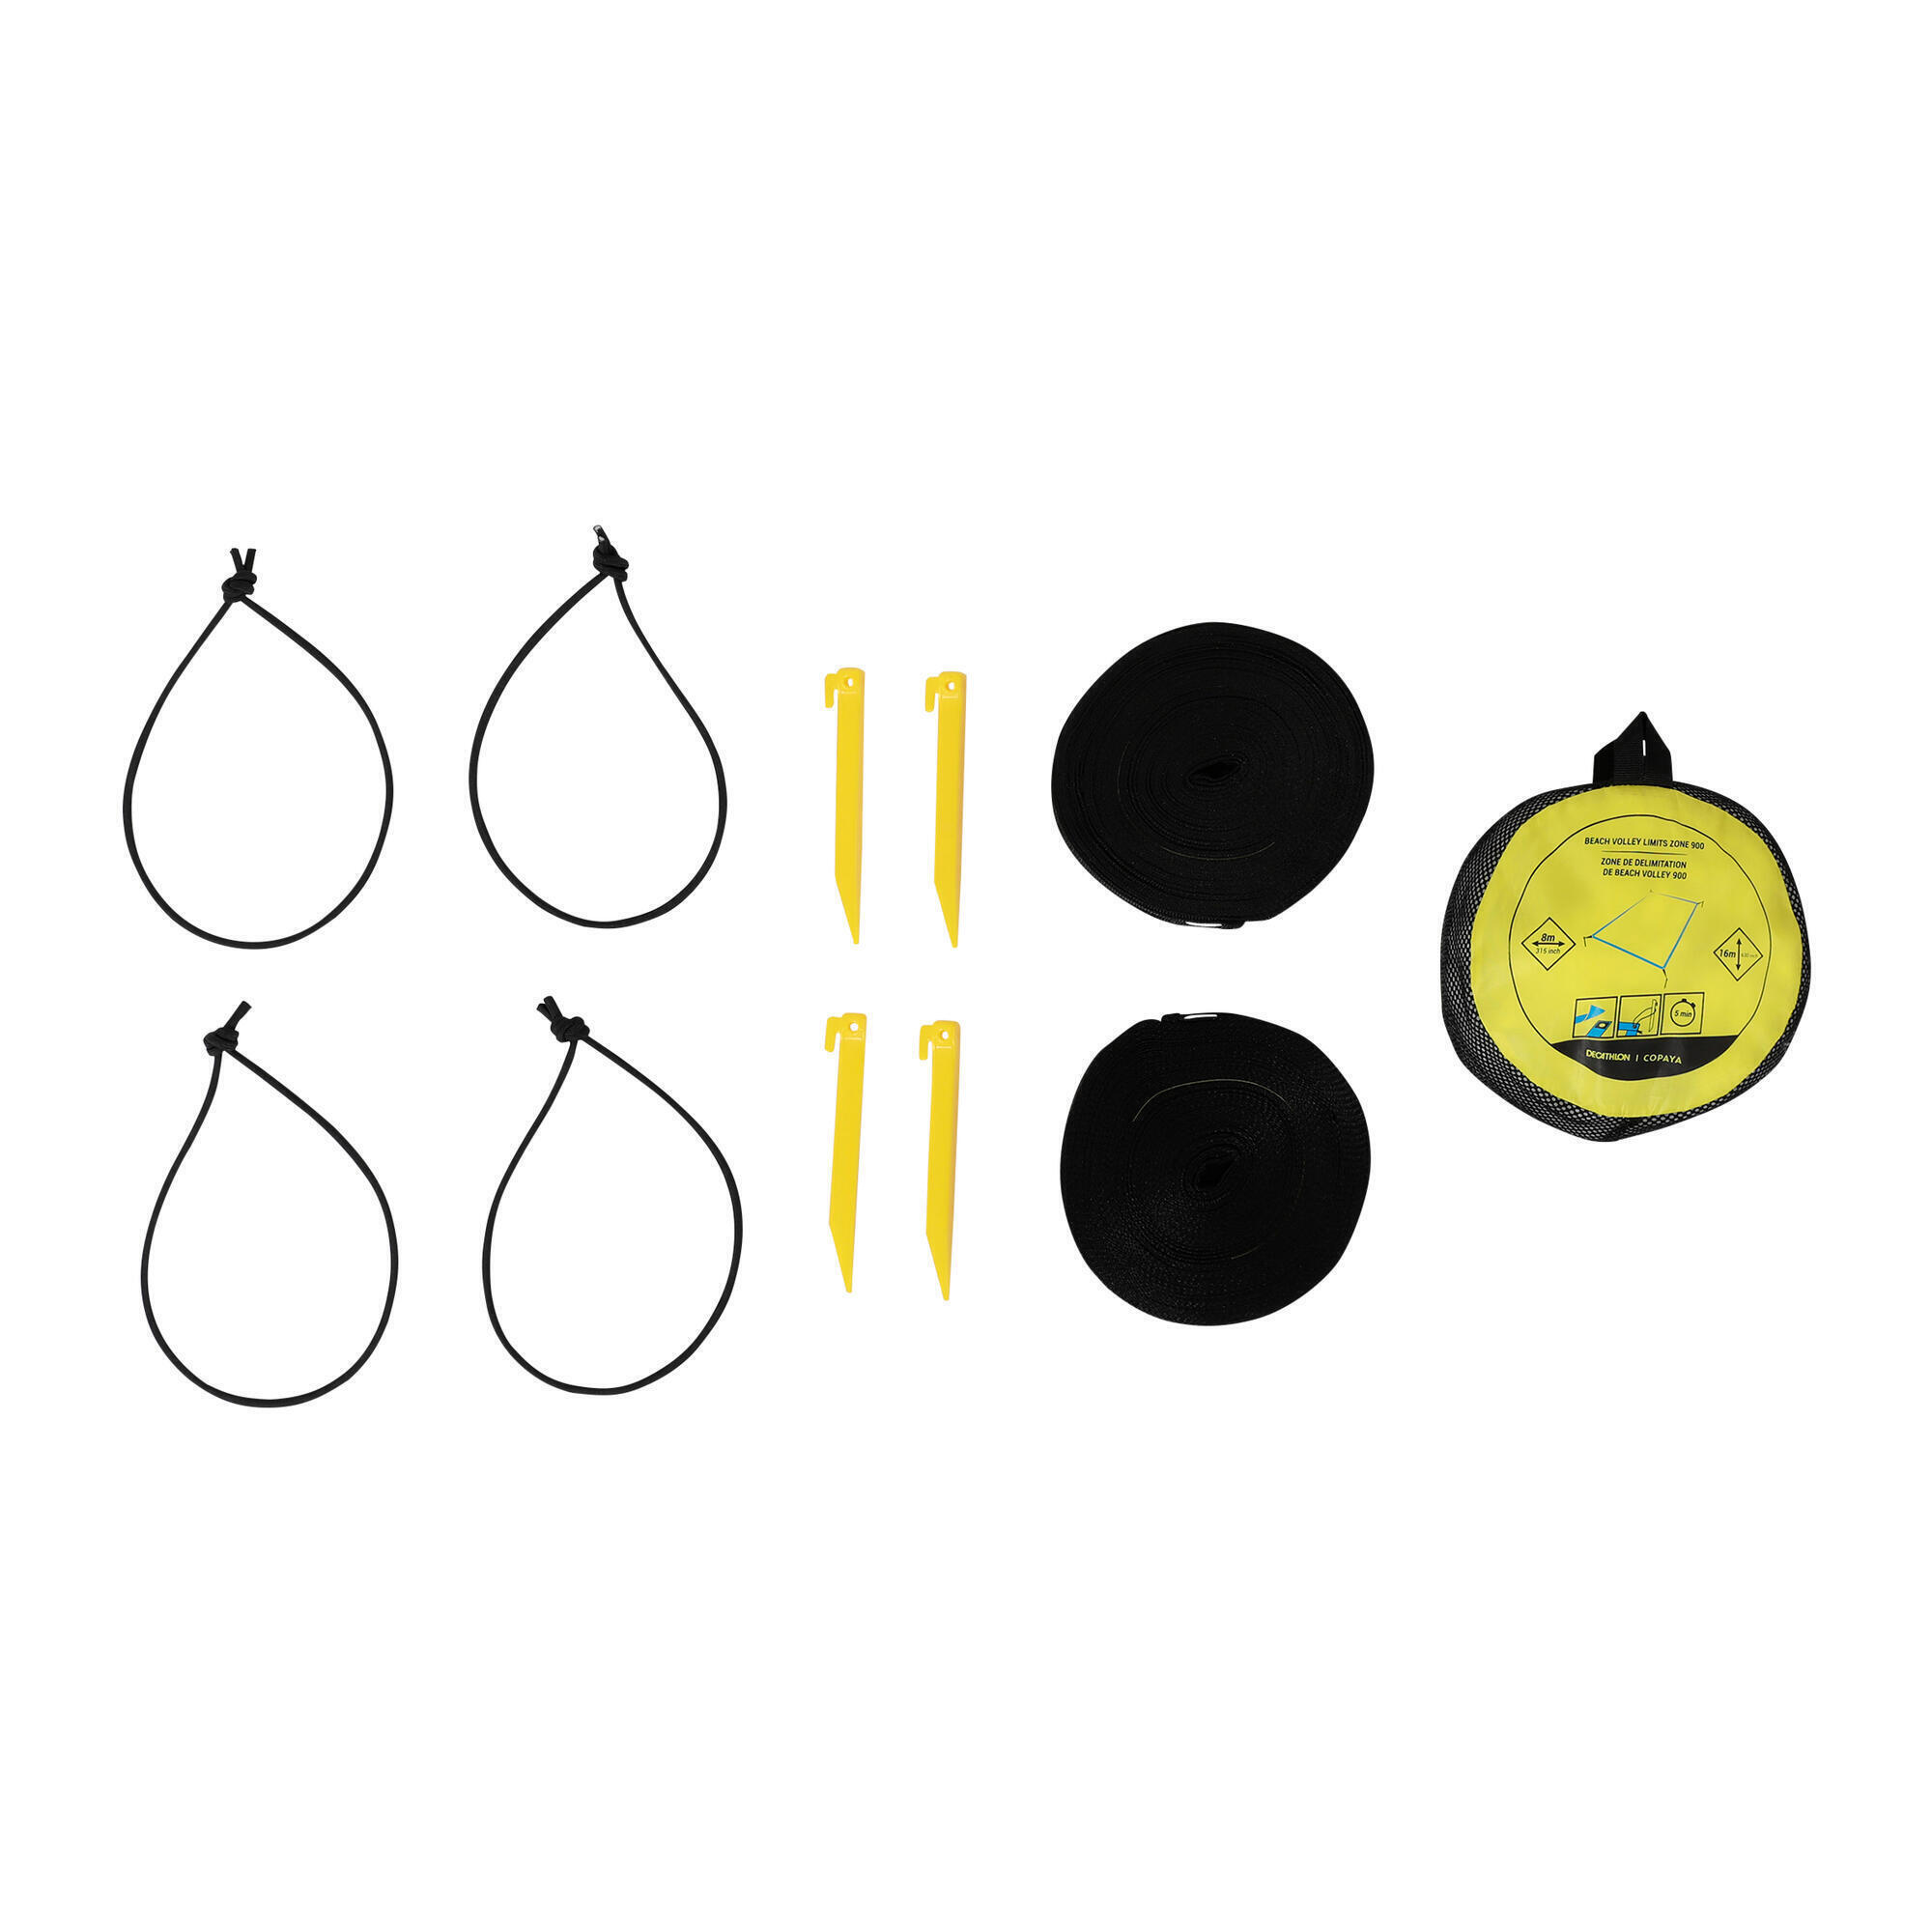 Beach Volleyball Markings BV900 - Official Dimensions (8mx16m) 2/5